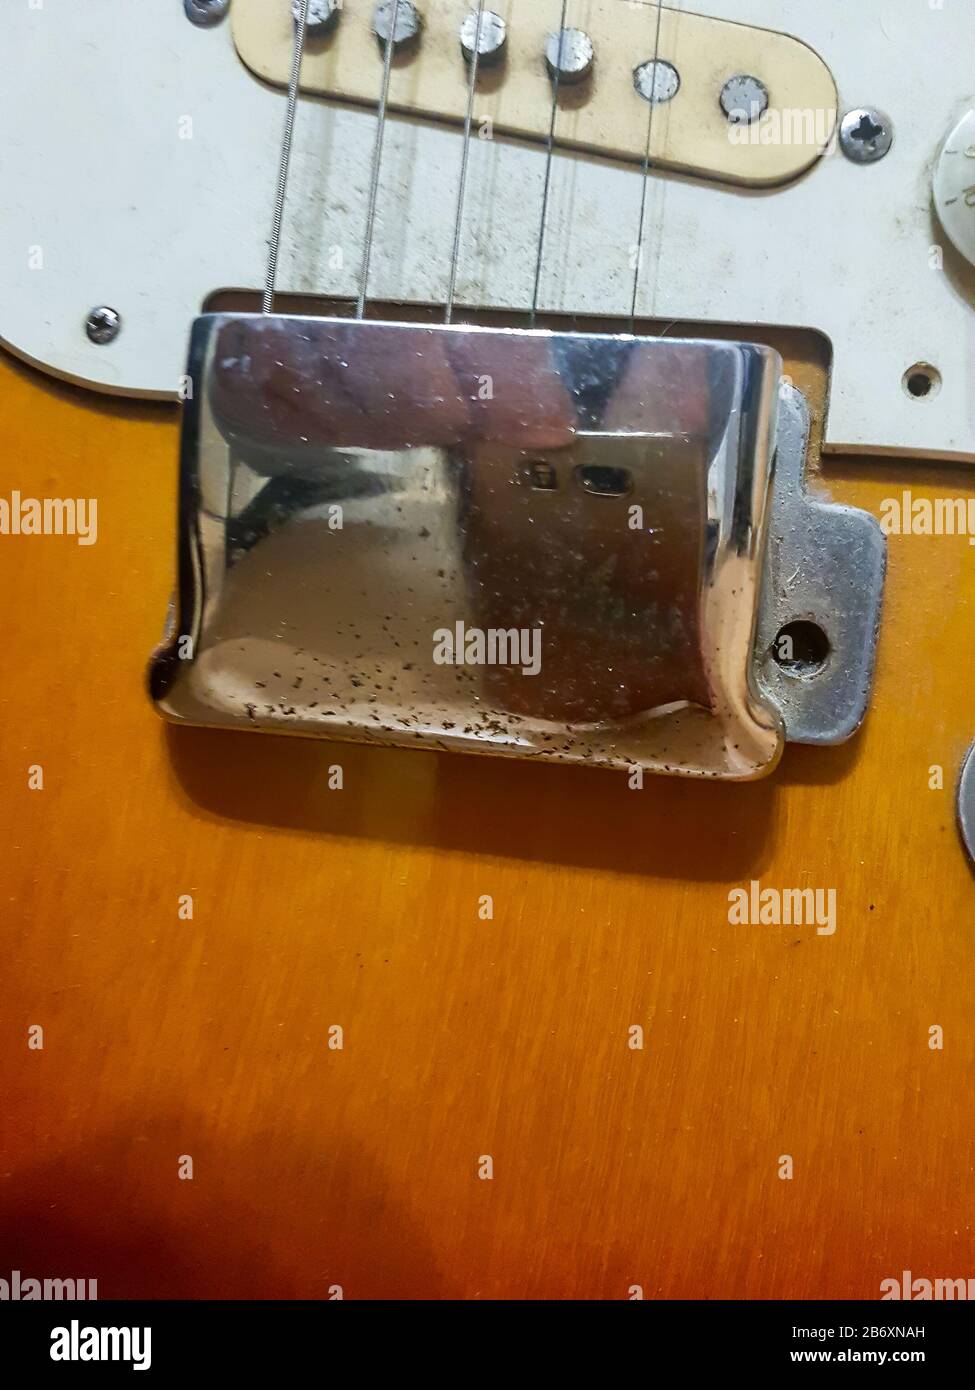 details of an old electric guitar Stock Photo